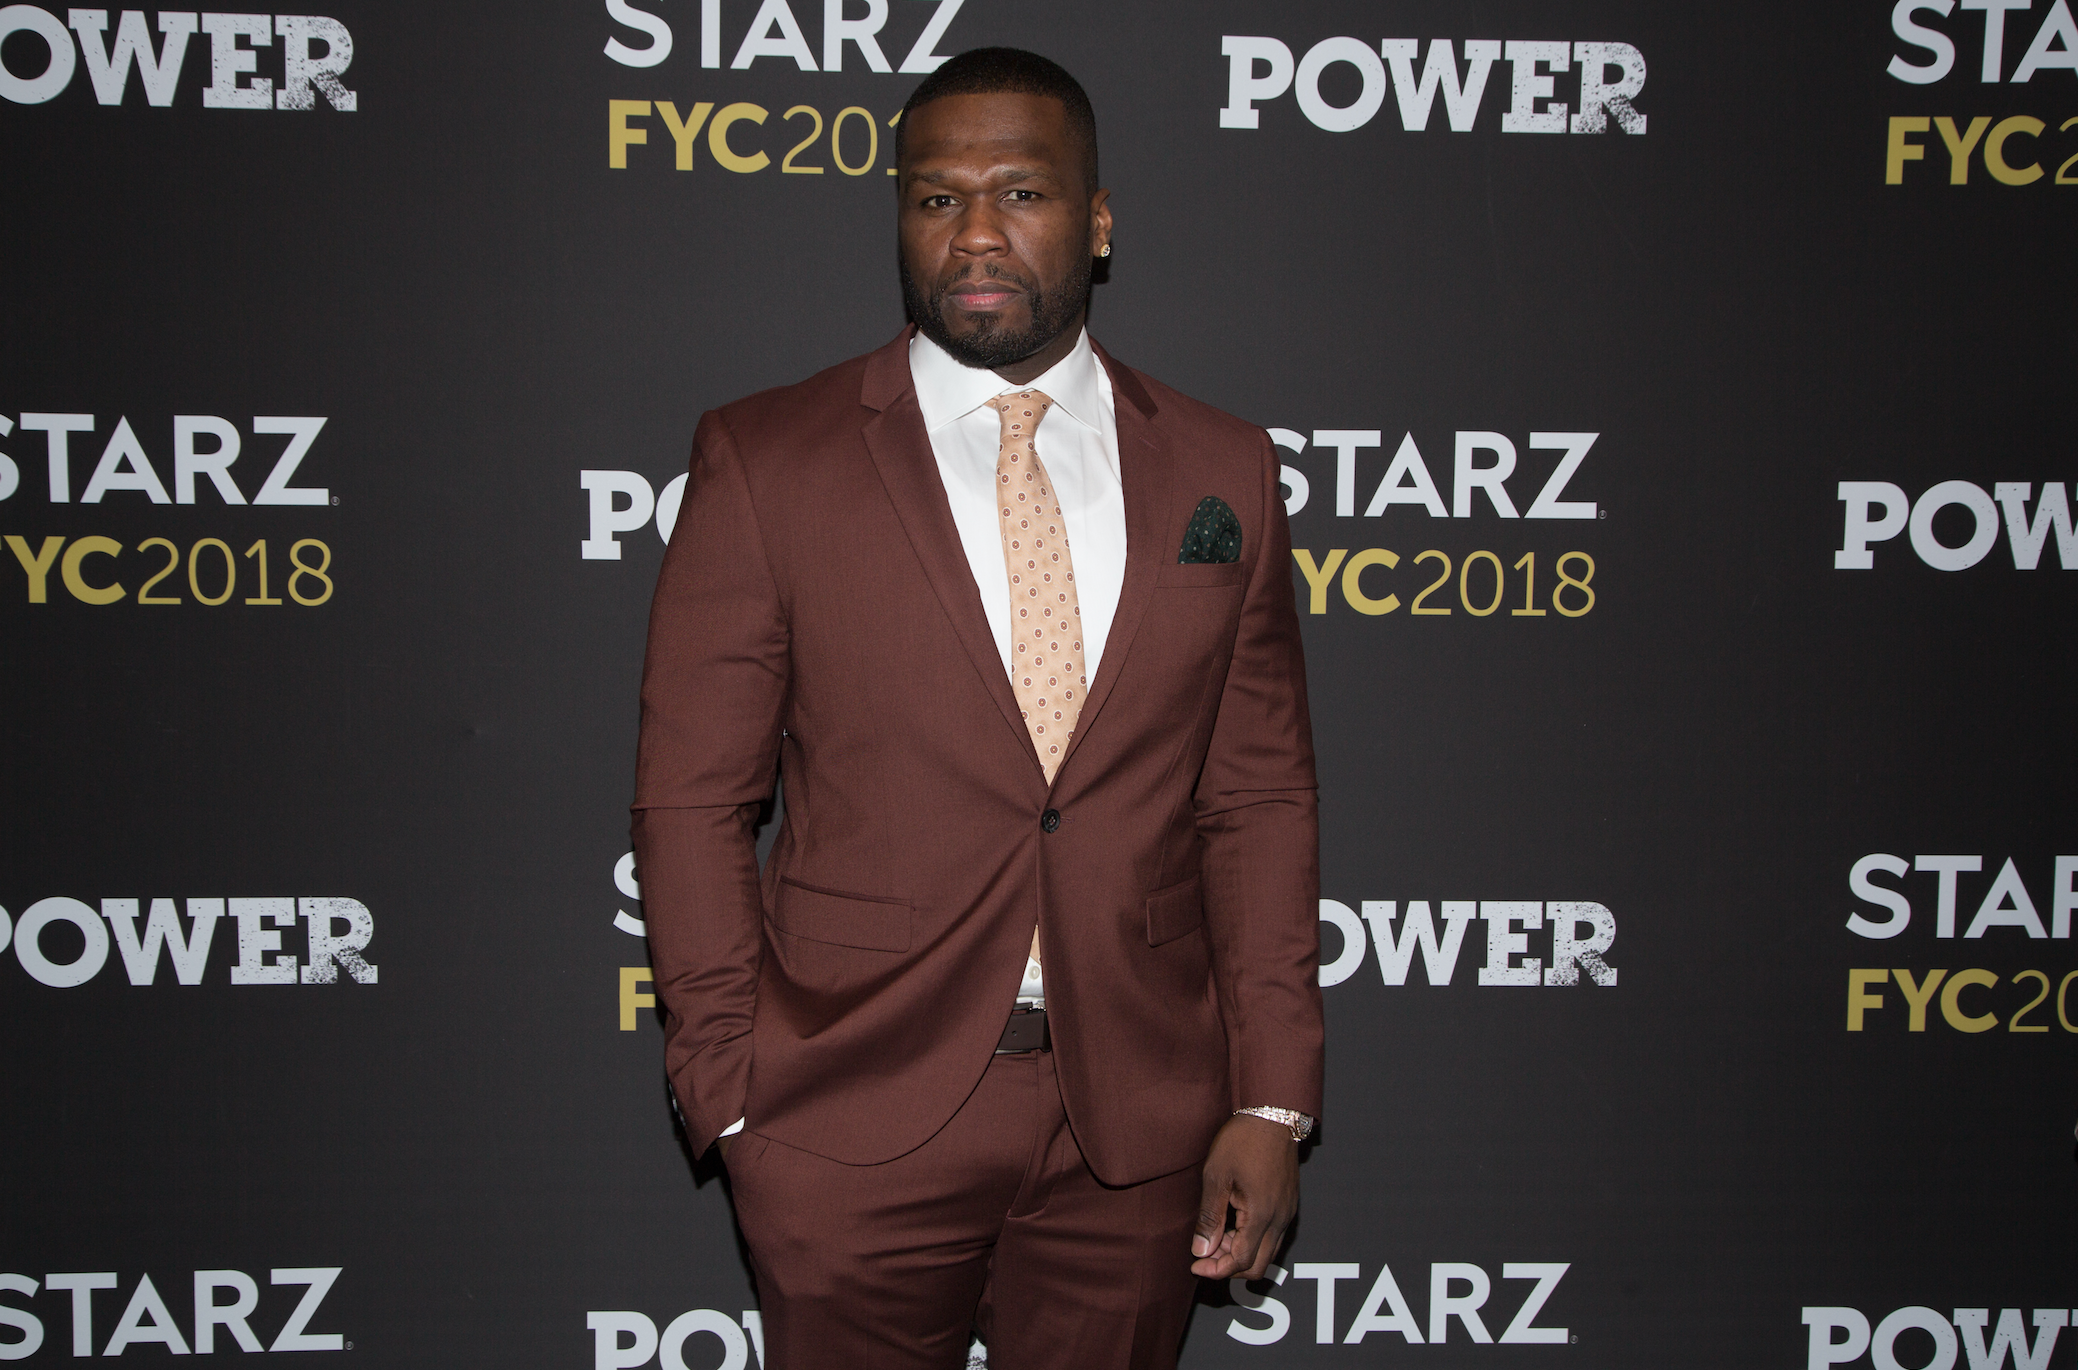 50 Cent to be sued in revenge porn case